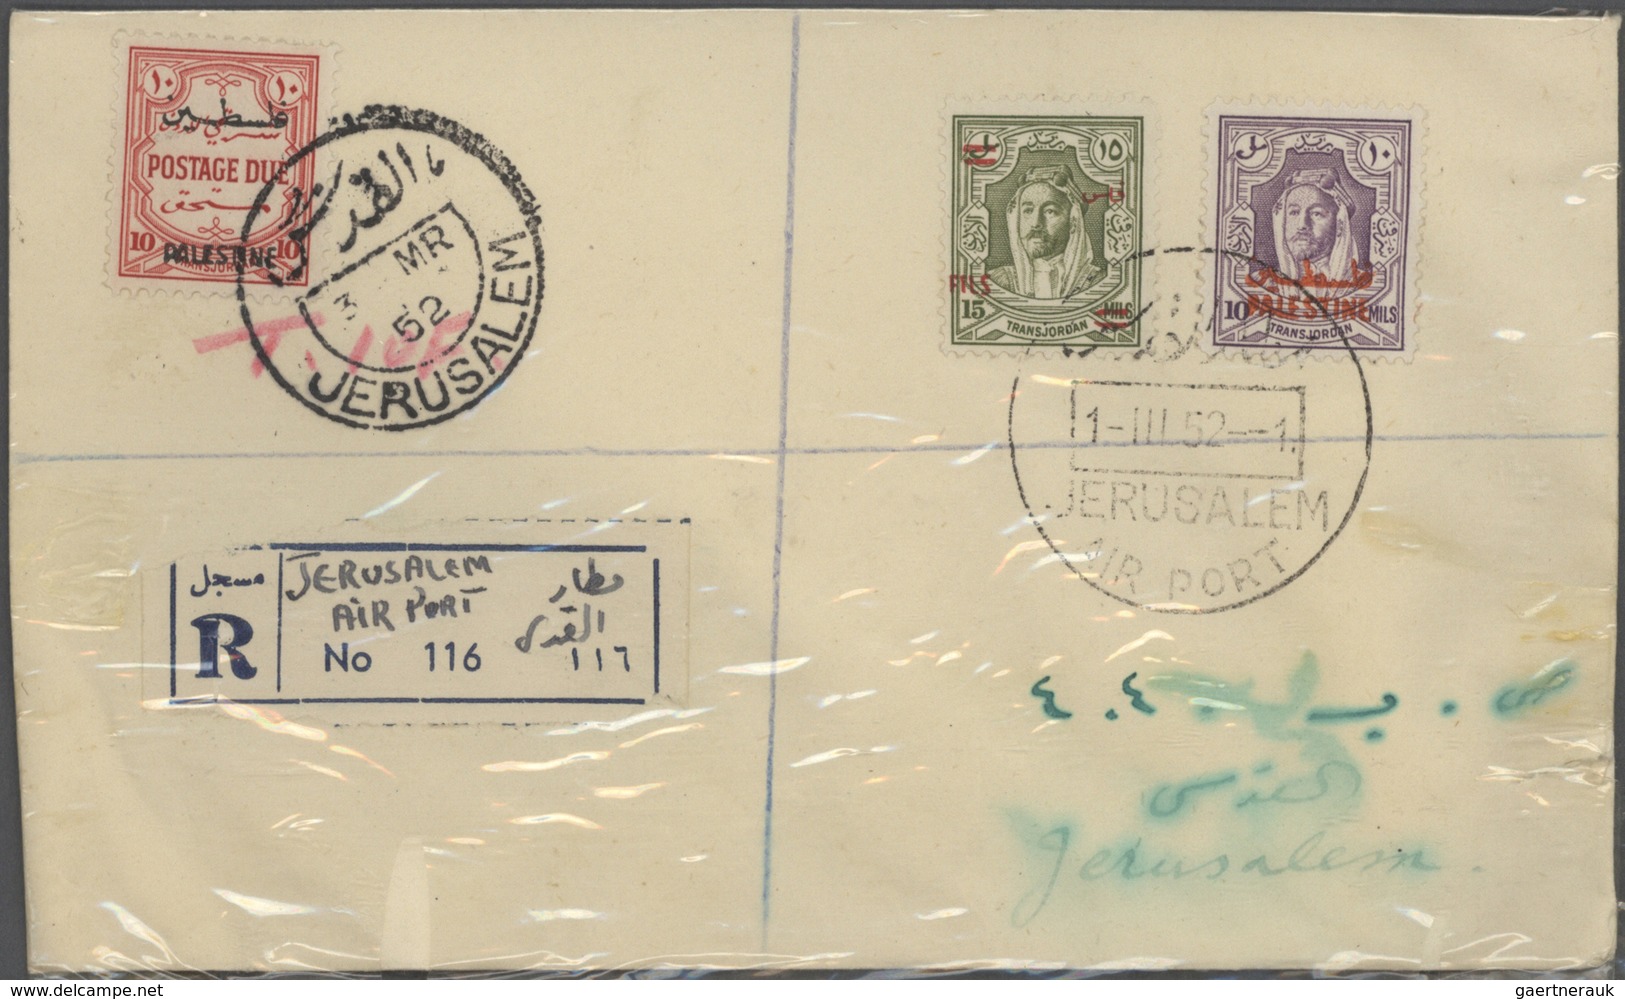 23279 Jordanien: 1925-80, Box containing 3040 covers & FDC, including registered mail, air mail, overprint